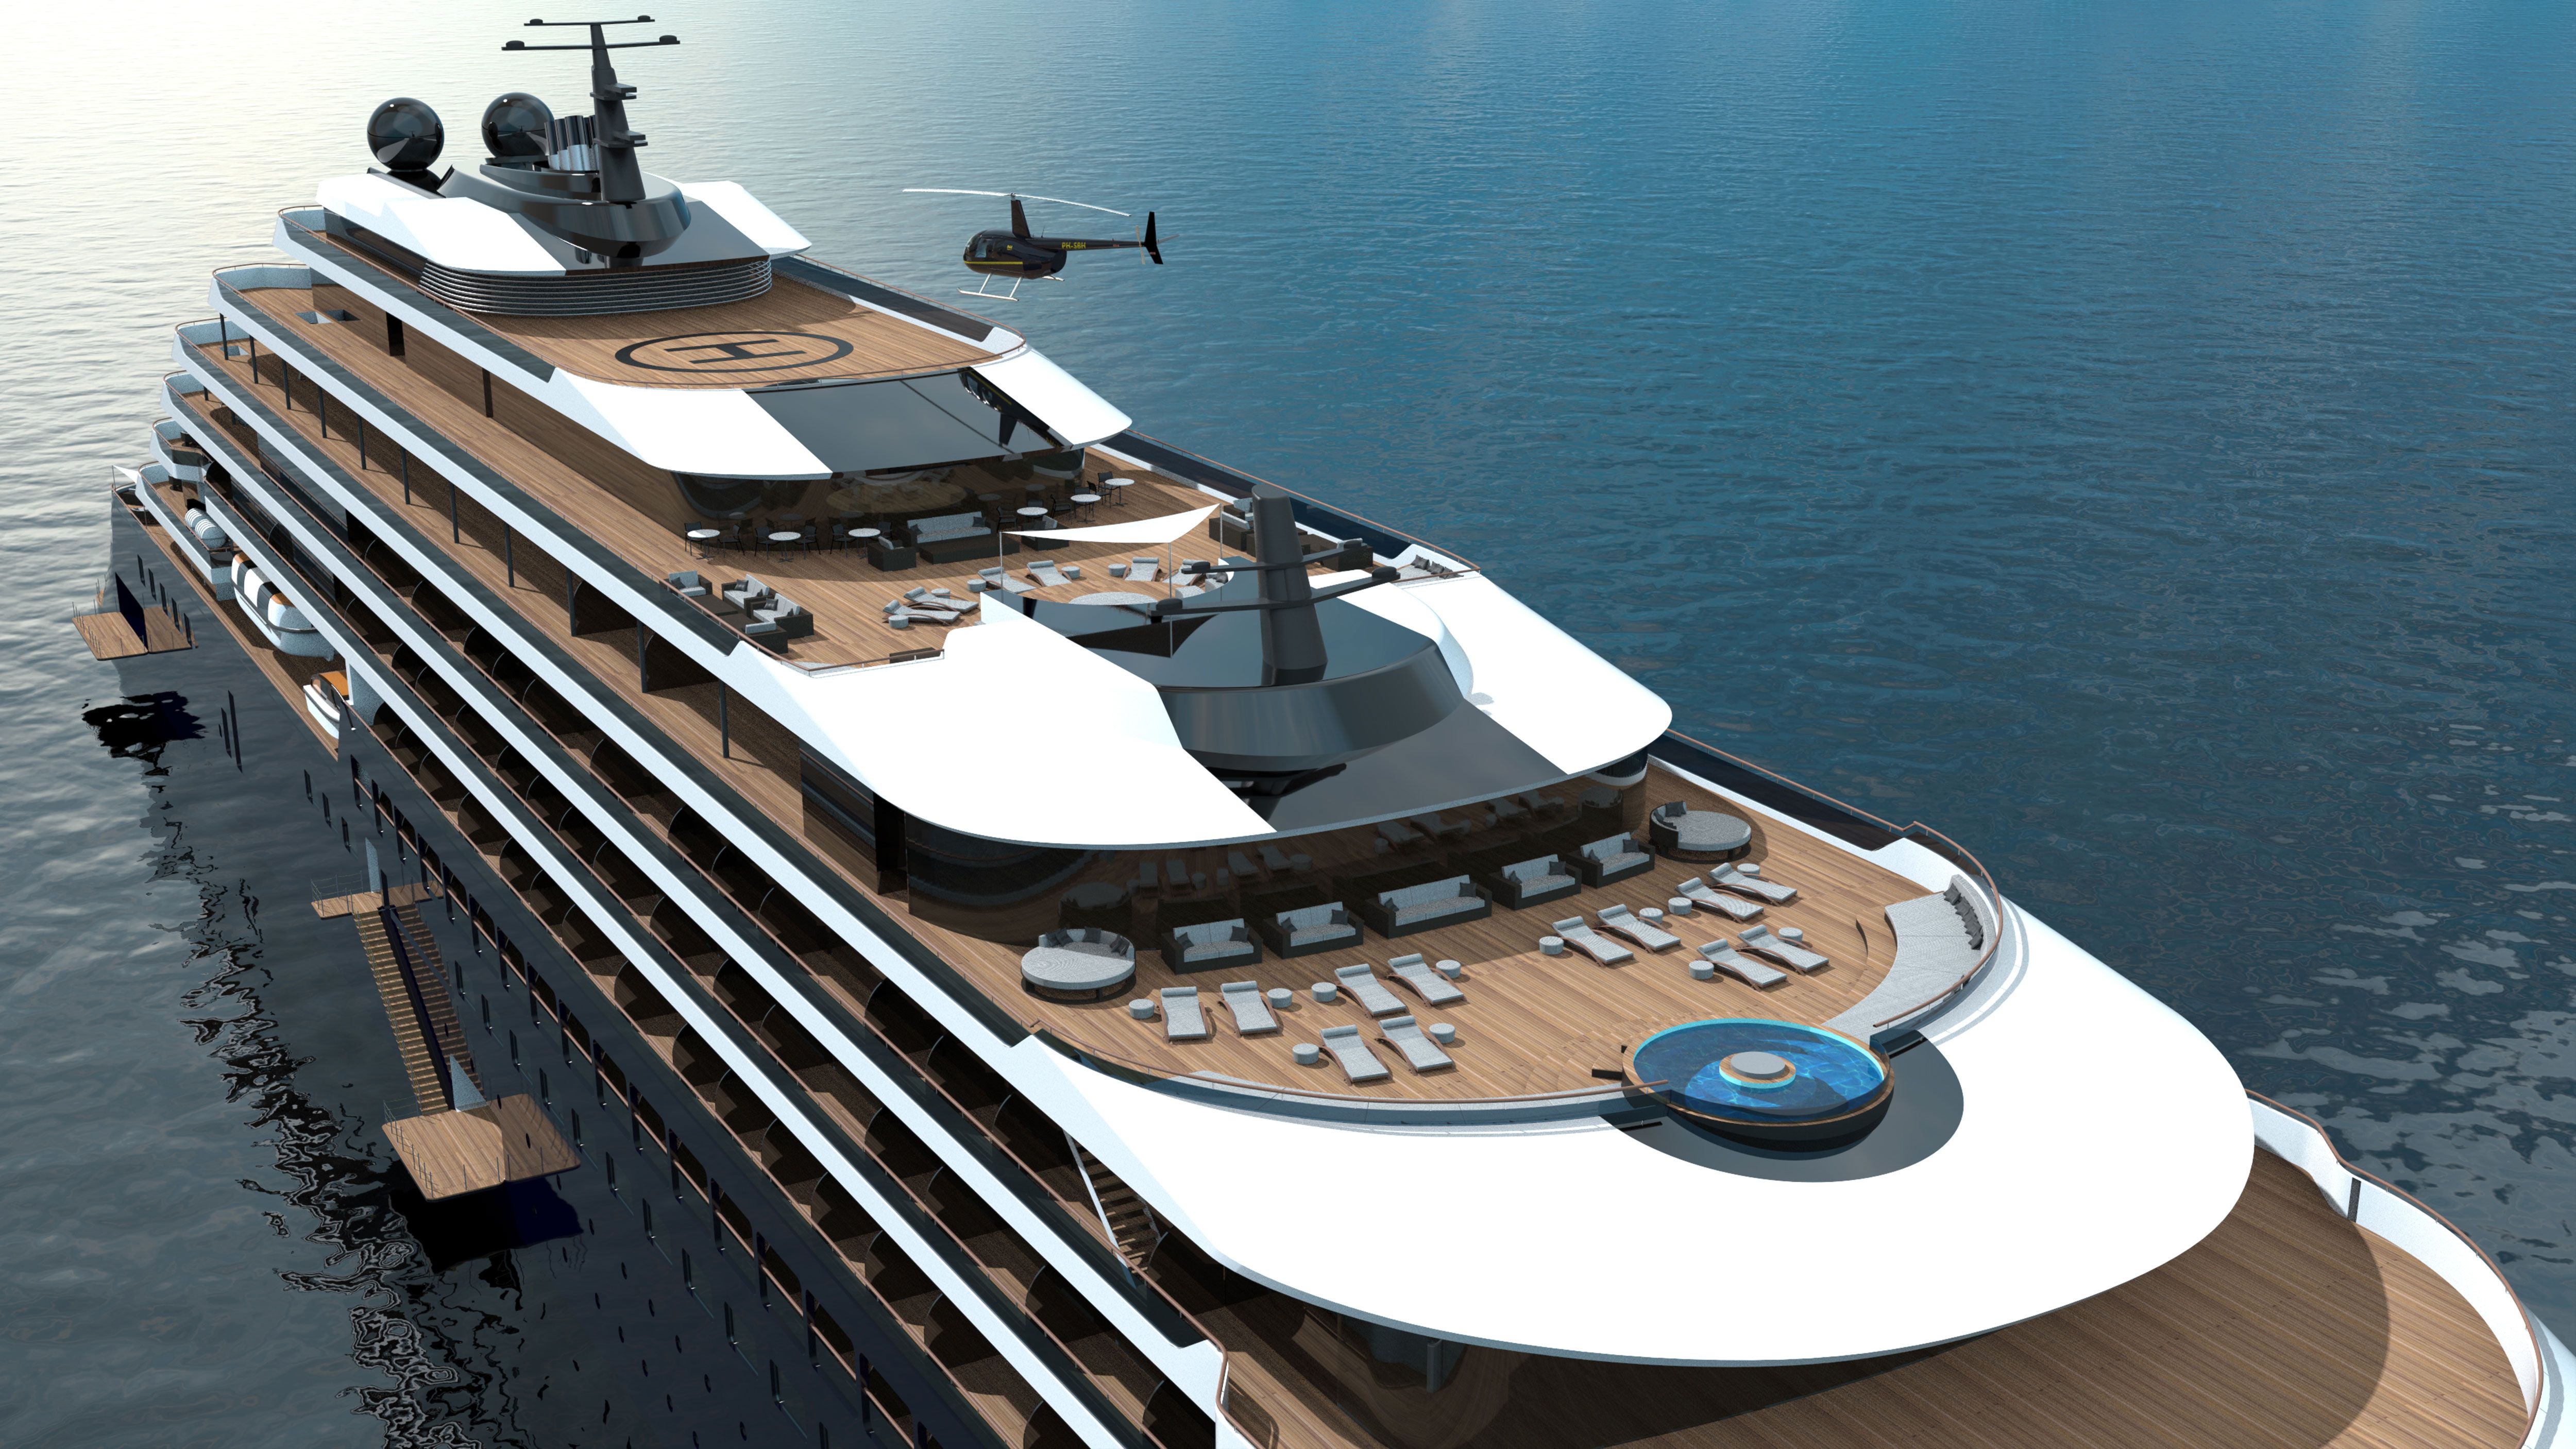 Ritz-Carlton Launches Its First Yacht in the Ultra-Luxury Cruise